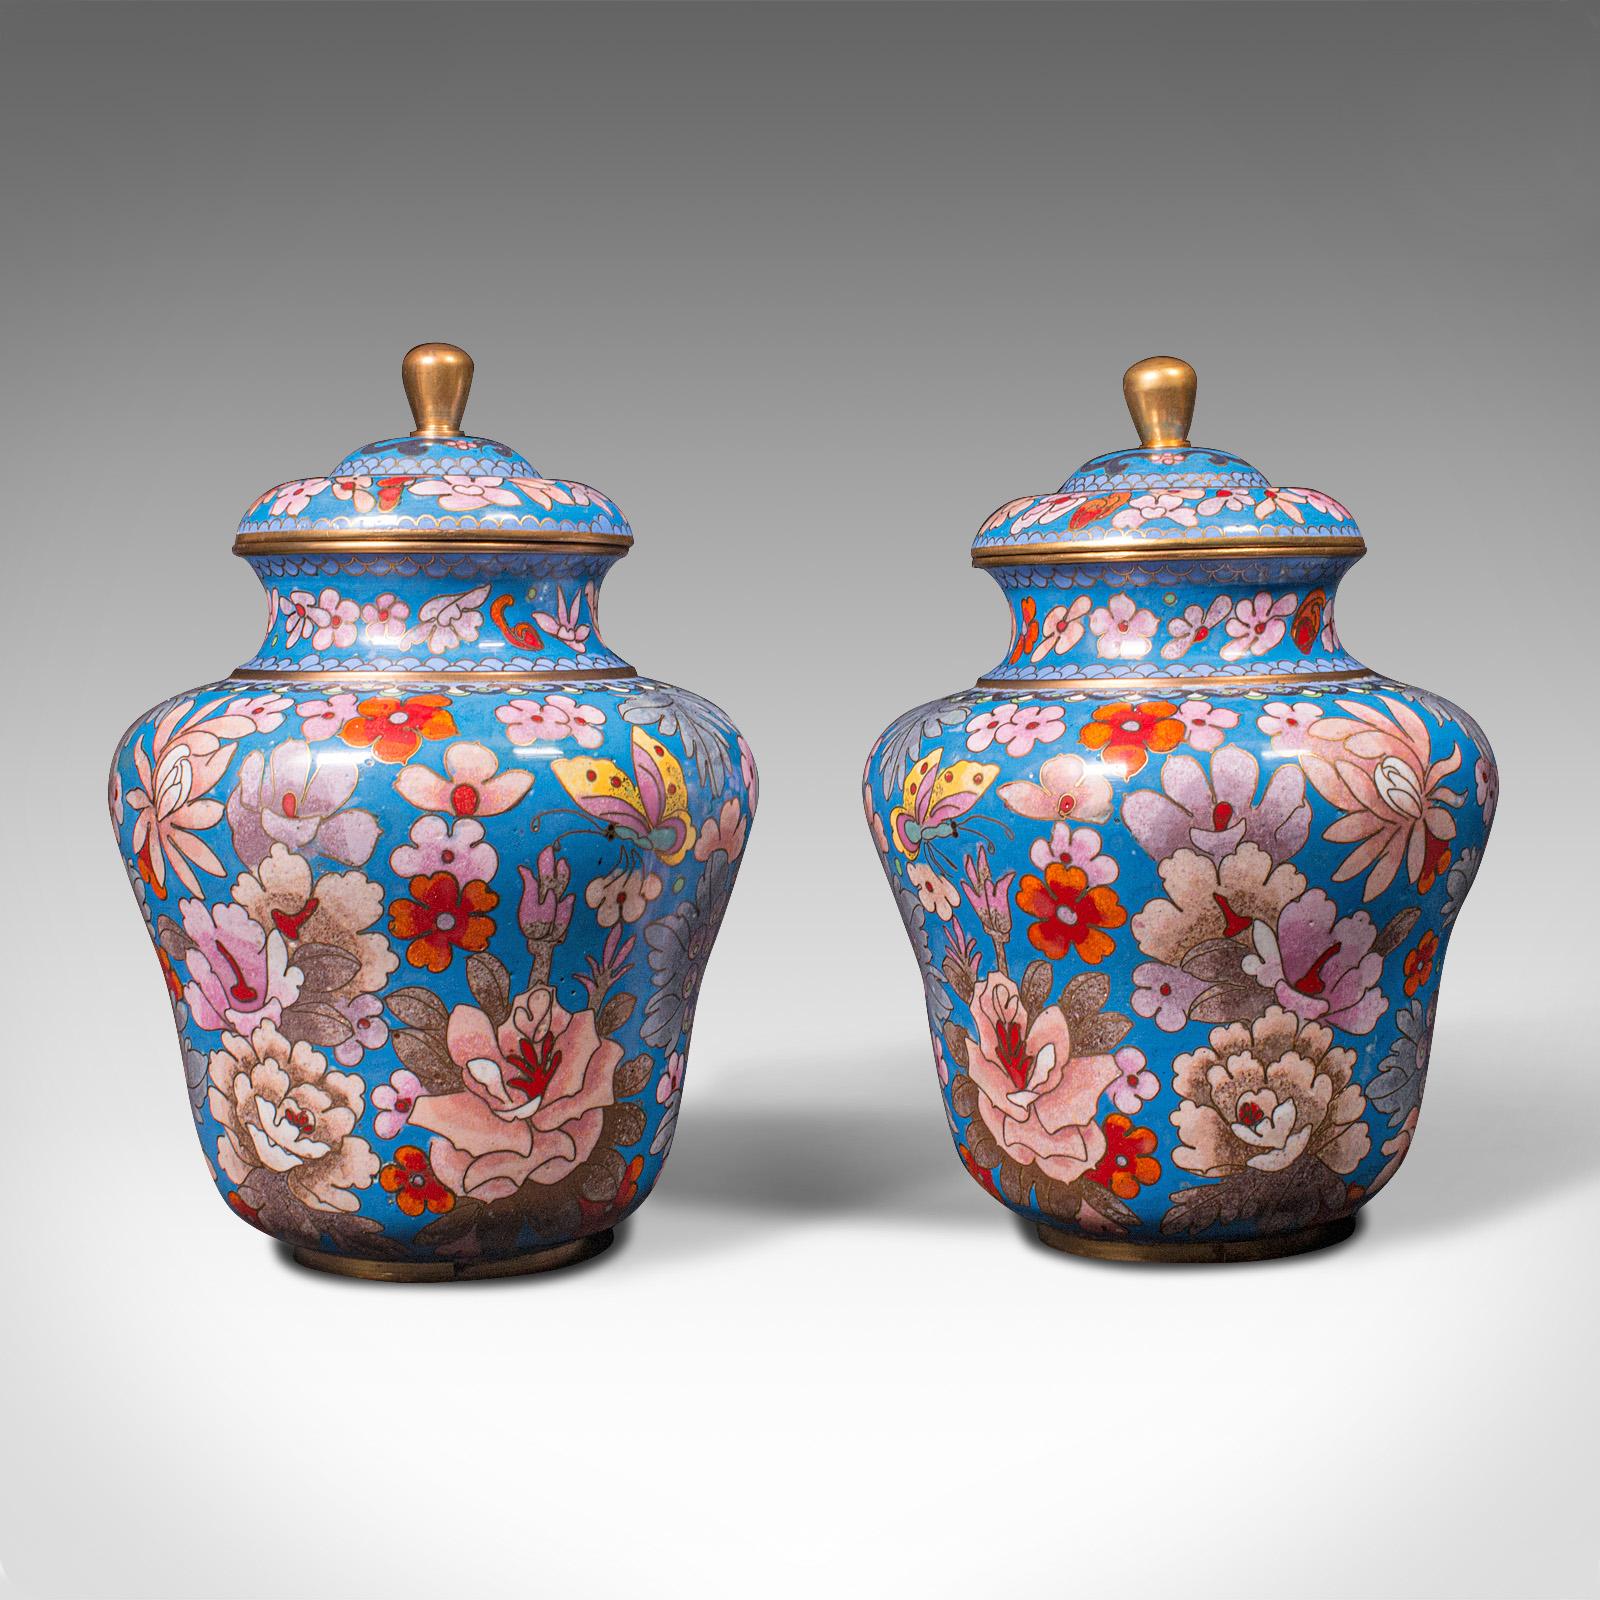 This is a pair of antique cloisonne spice jars. An English, ceramic decorative lidded ginger jar, dating to the late Victorian period, circa 1900.

Pleasingly decorative example of English cloisonne
Displays a desirable aged patina and in good